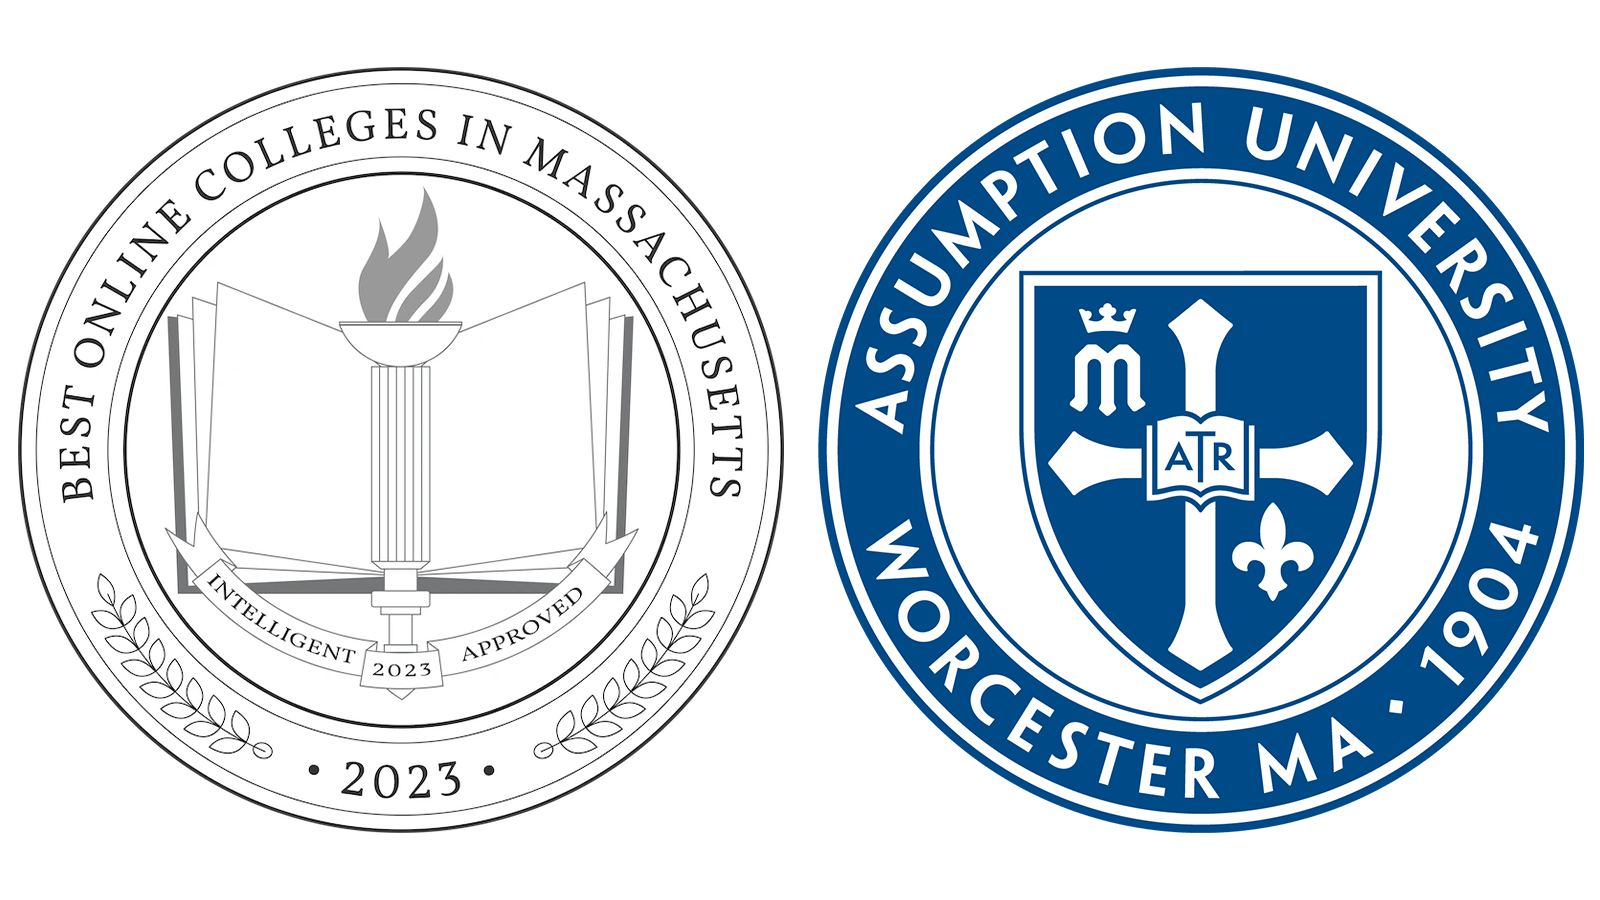 Assumption University is one of the best colleges in Massachusetts for online education according to Intelligent.com